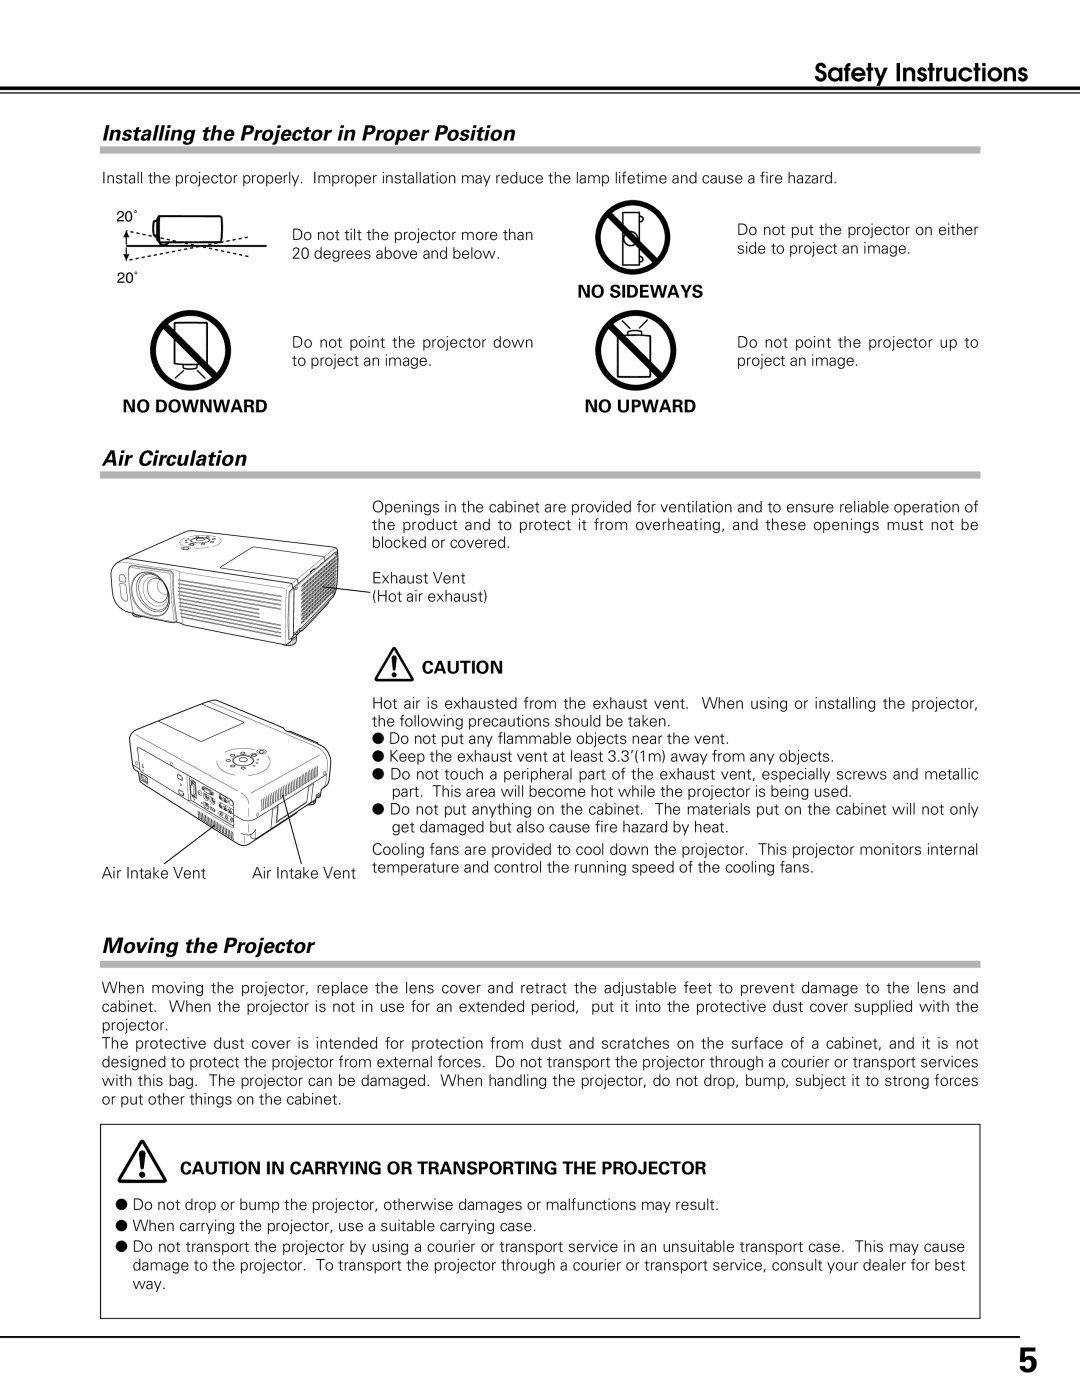 Black Box LC-XE10 Safety Instructions, Installing the Projector in Proper Position, Air Circulation, Moving the Projector 